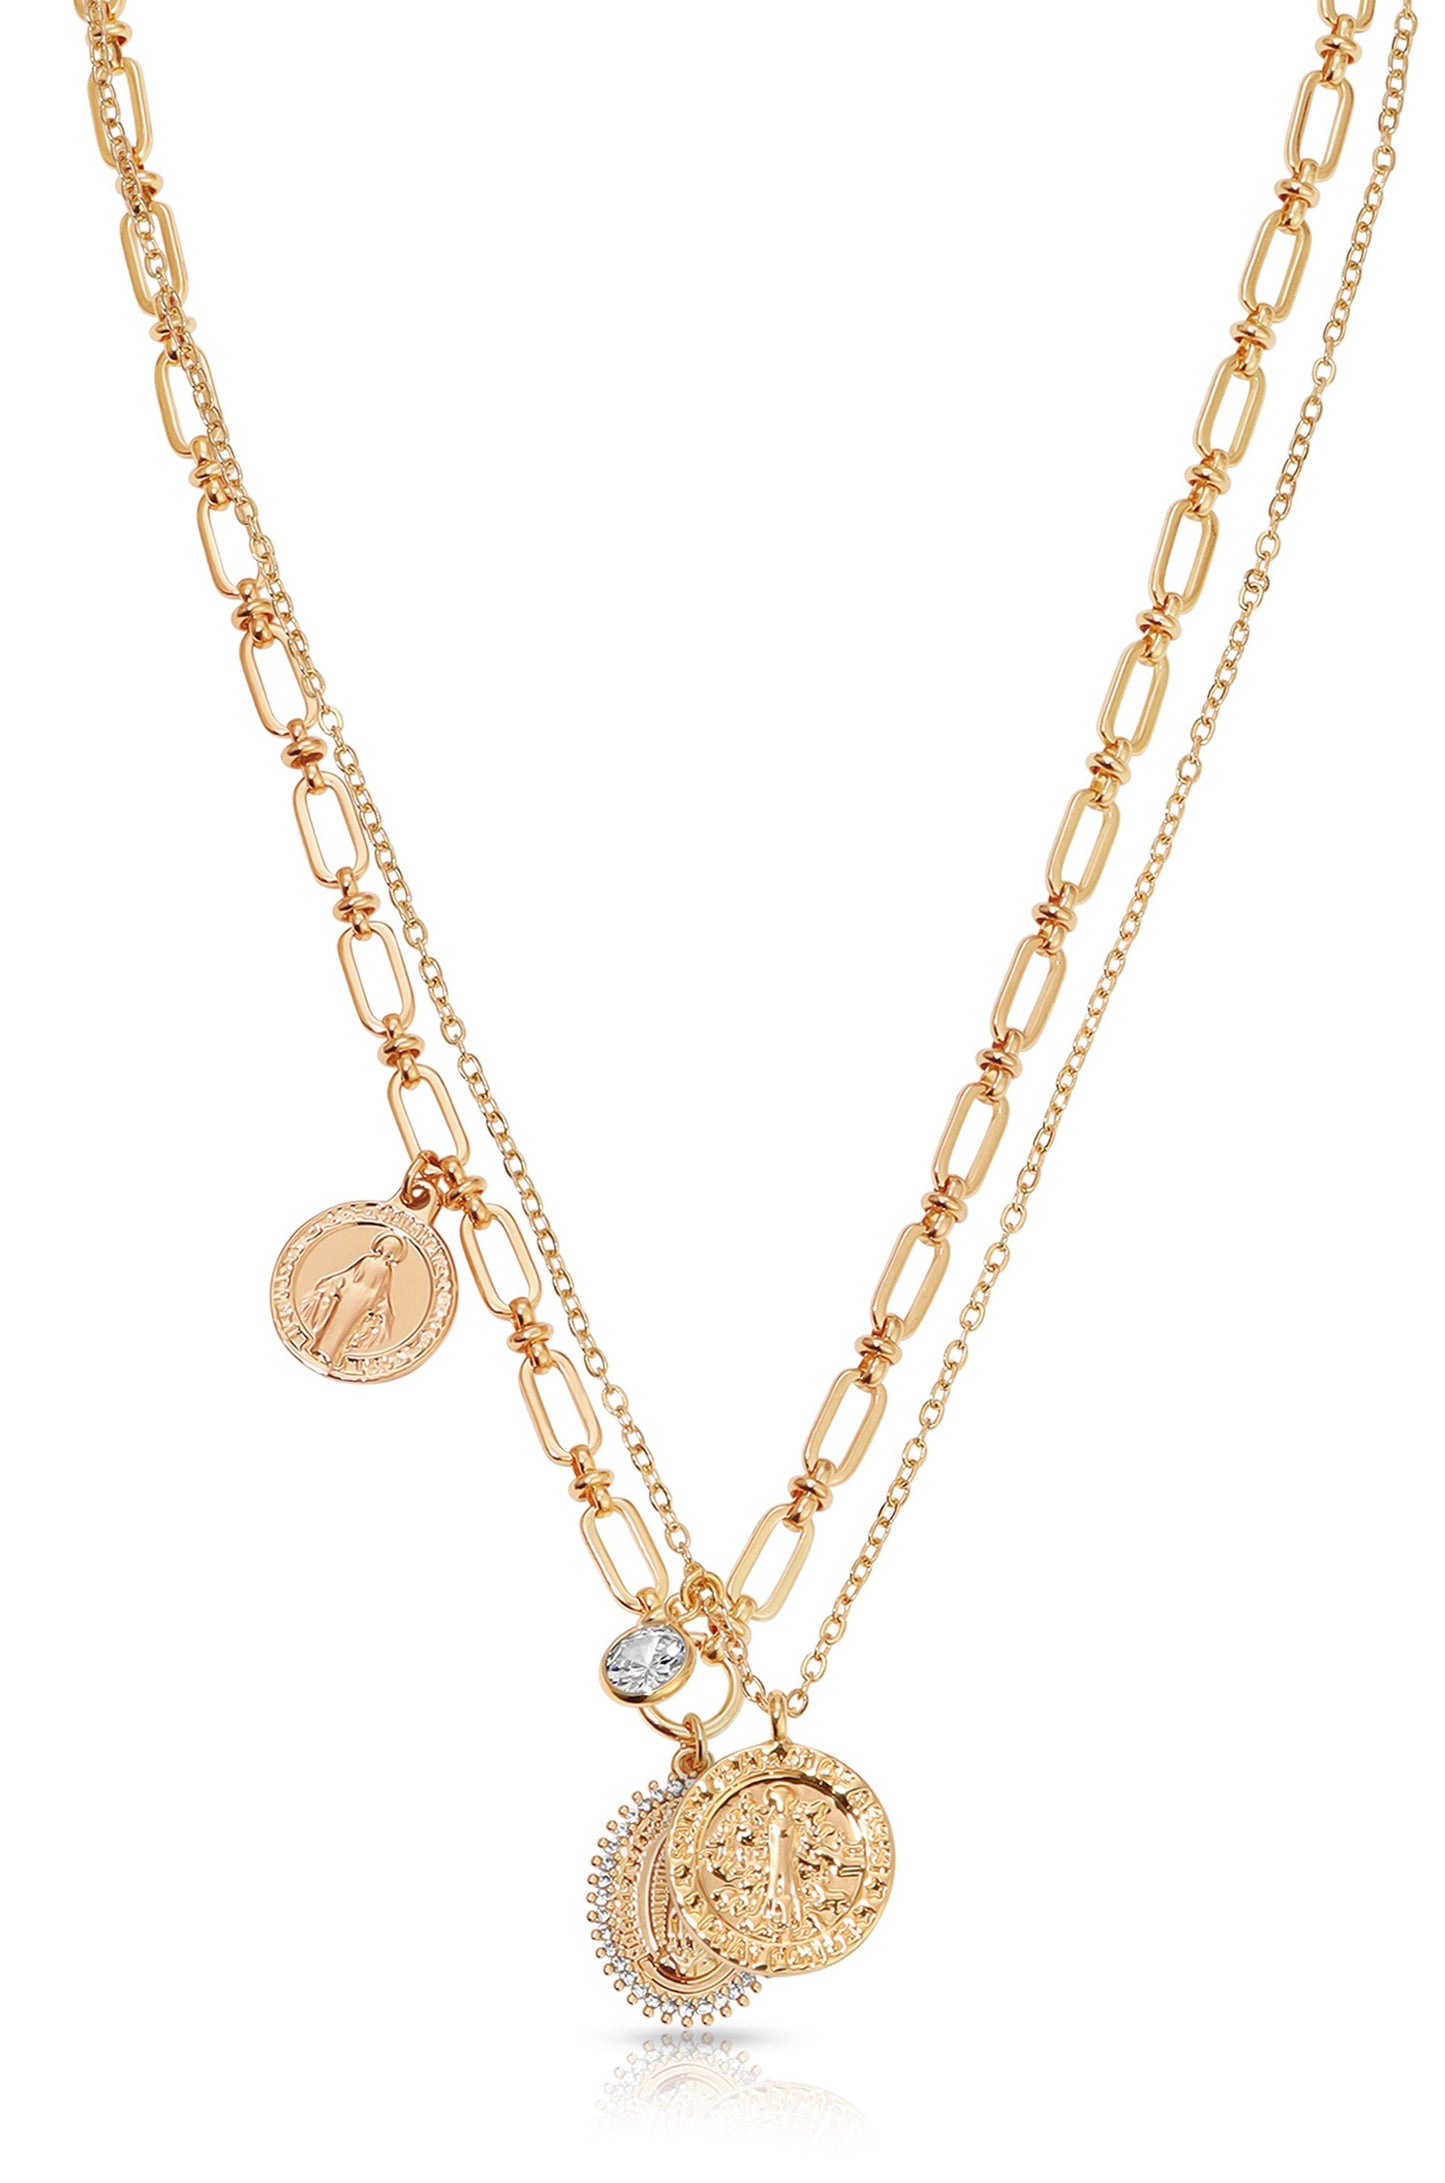 Layered Saints 18k Gold Plated Necklace Set close up view